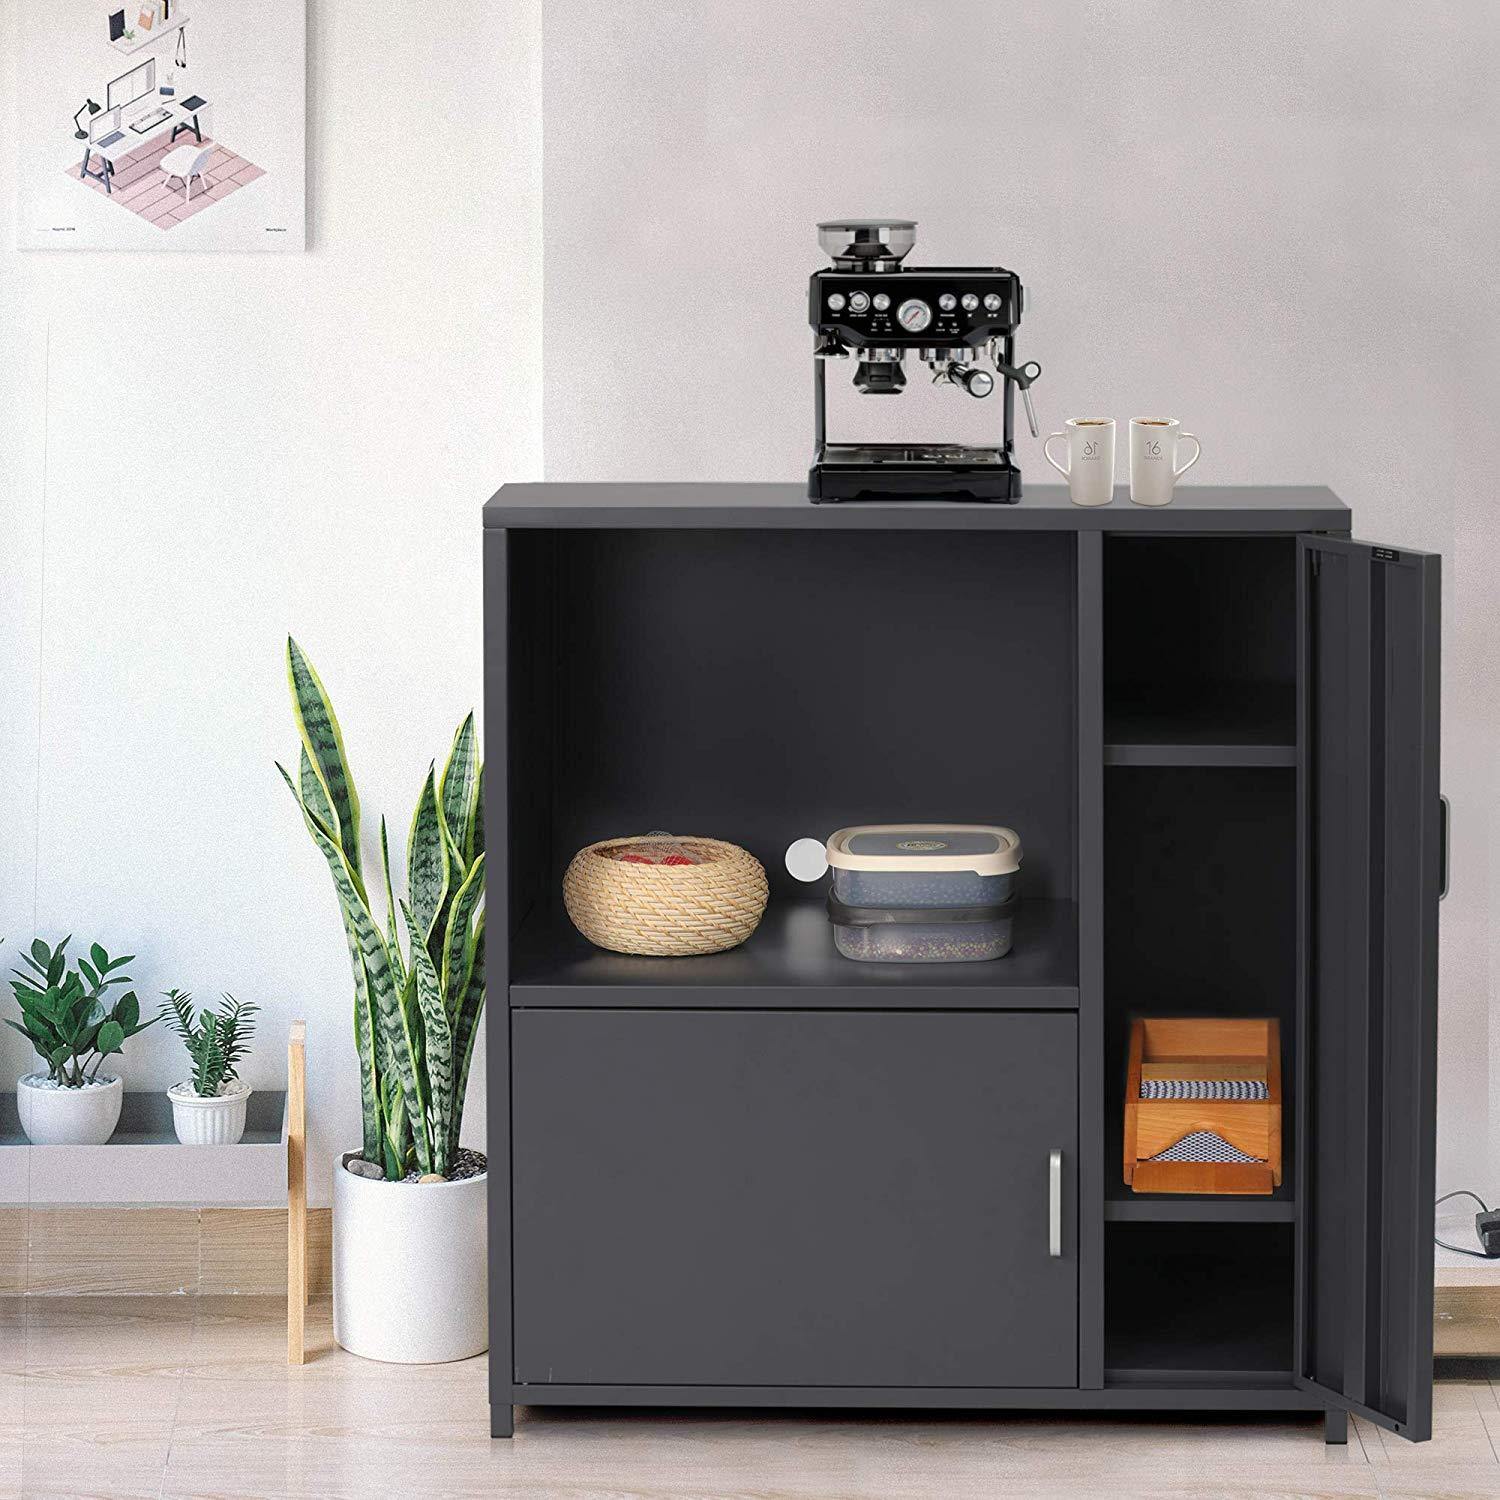 microwave / coffee maker locker adjustable large capacity home and office multifunctional storage cabinet - Bosonshop